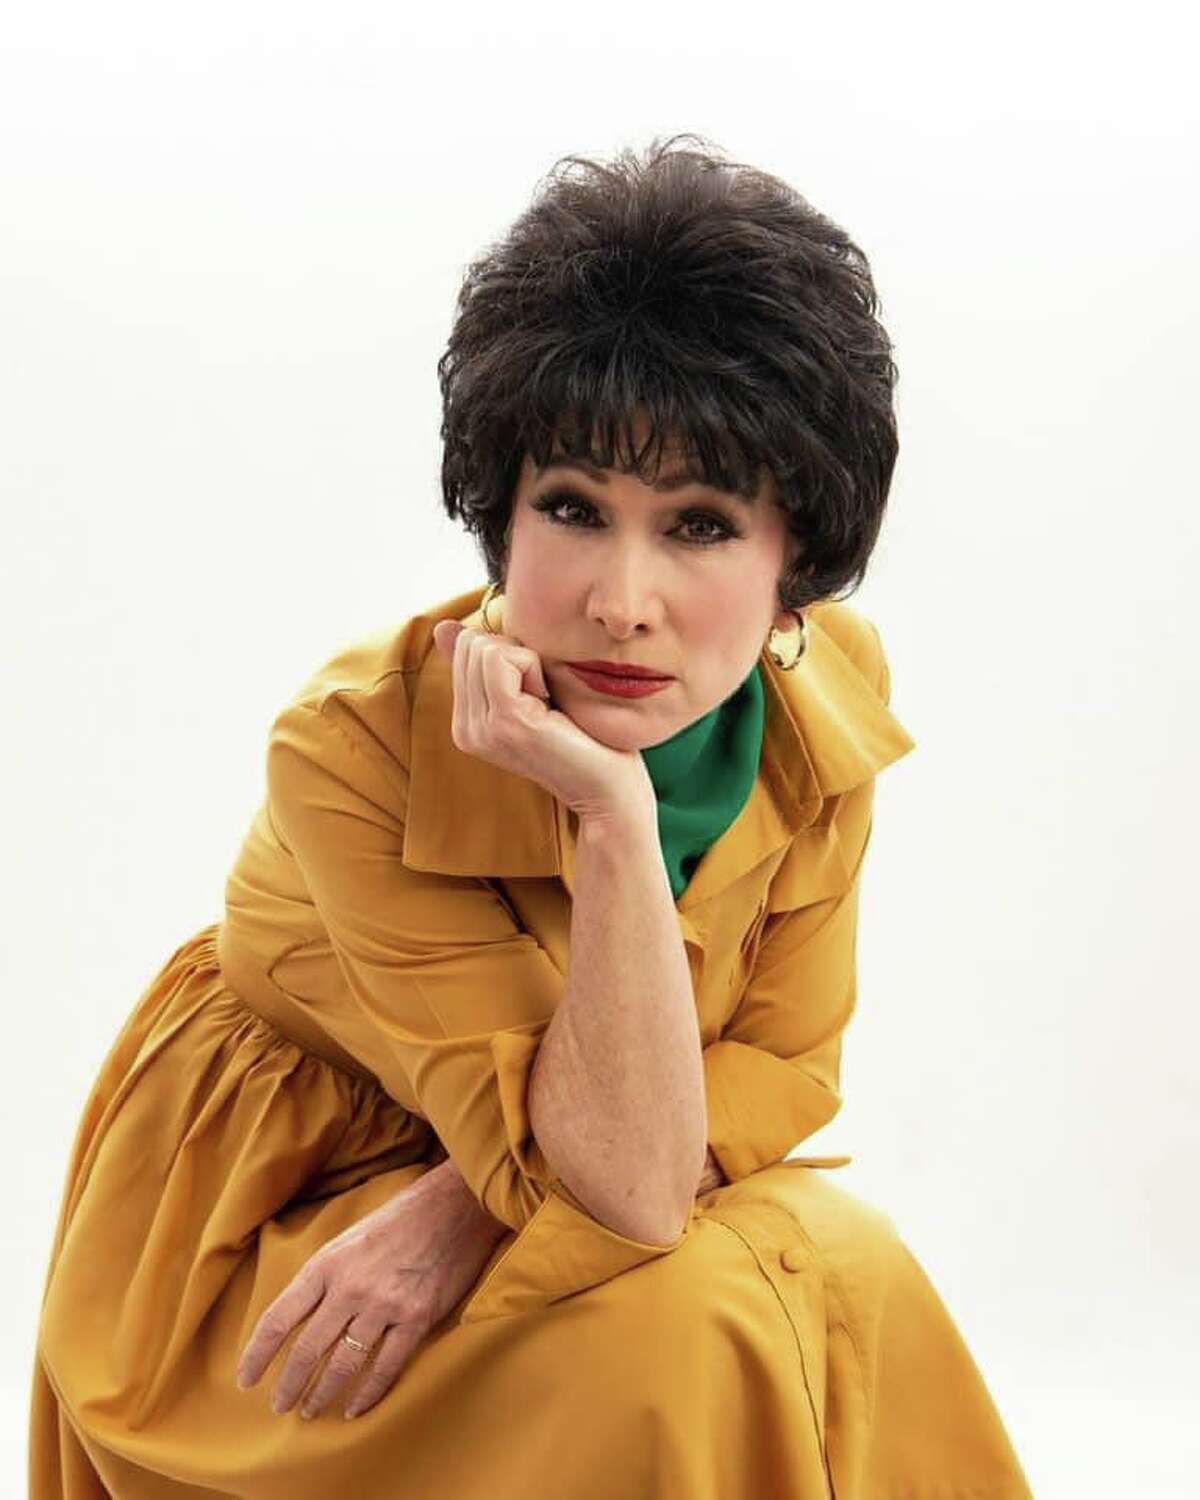 Lisa Irion will perform as Patsy Cline during the June 18 show “The Cash and Cline Show” at the Crighton Theatre in Conroe.